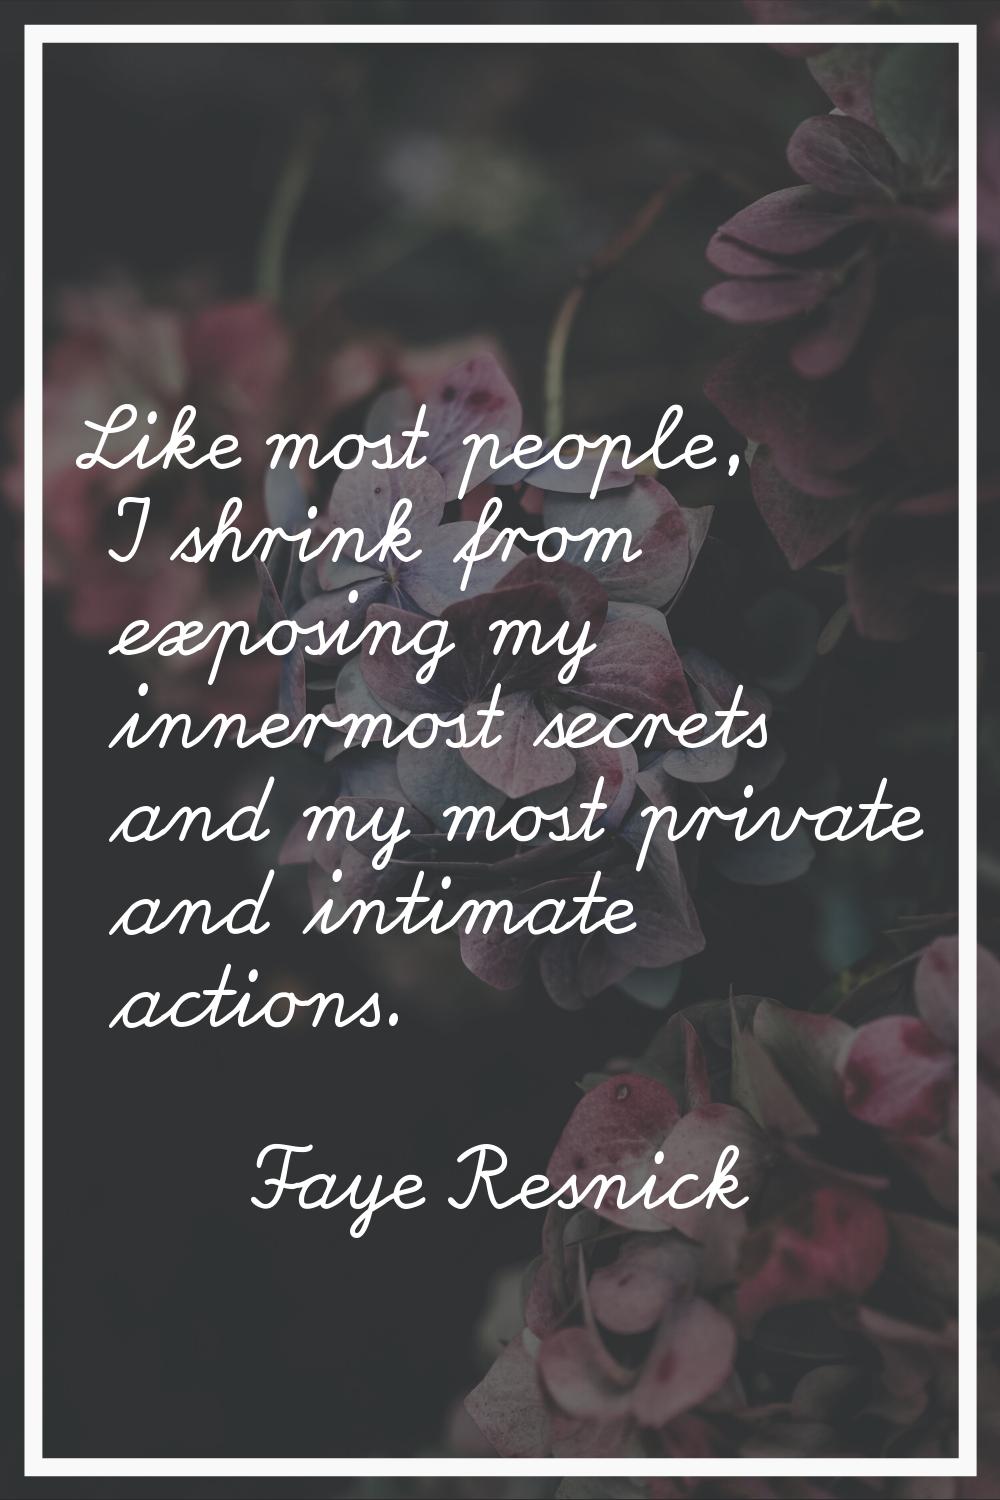 Like most people, I shrink from exposing my innermost secrets and my most private and intimate acti